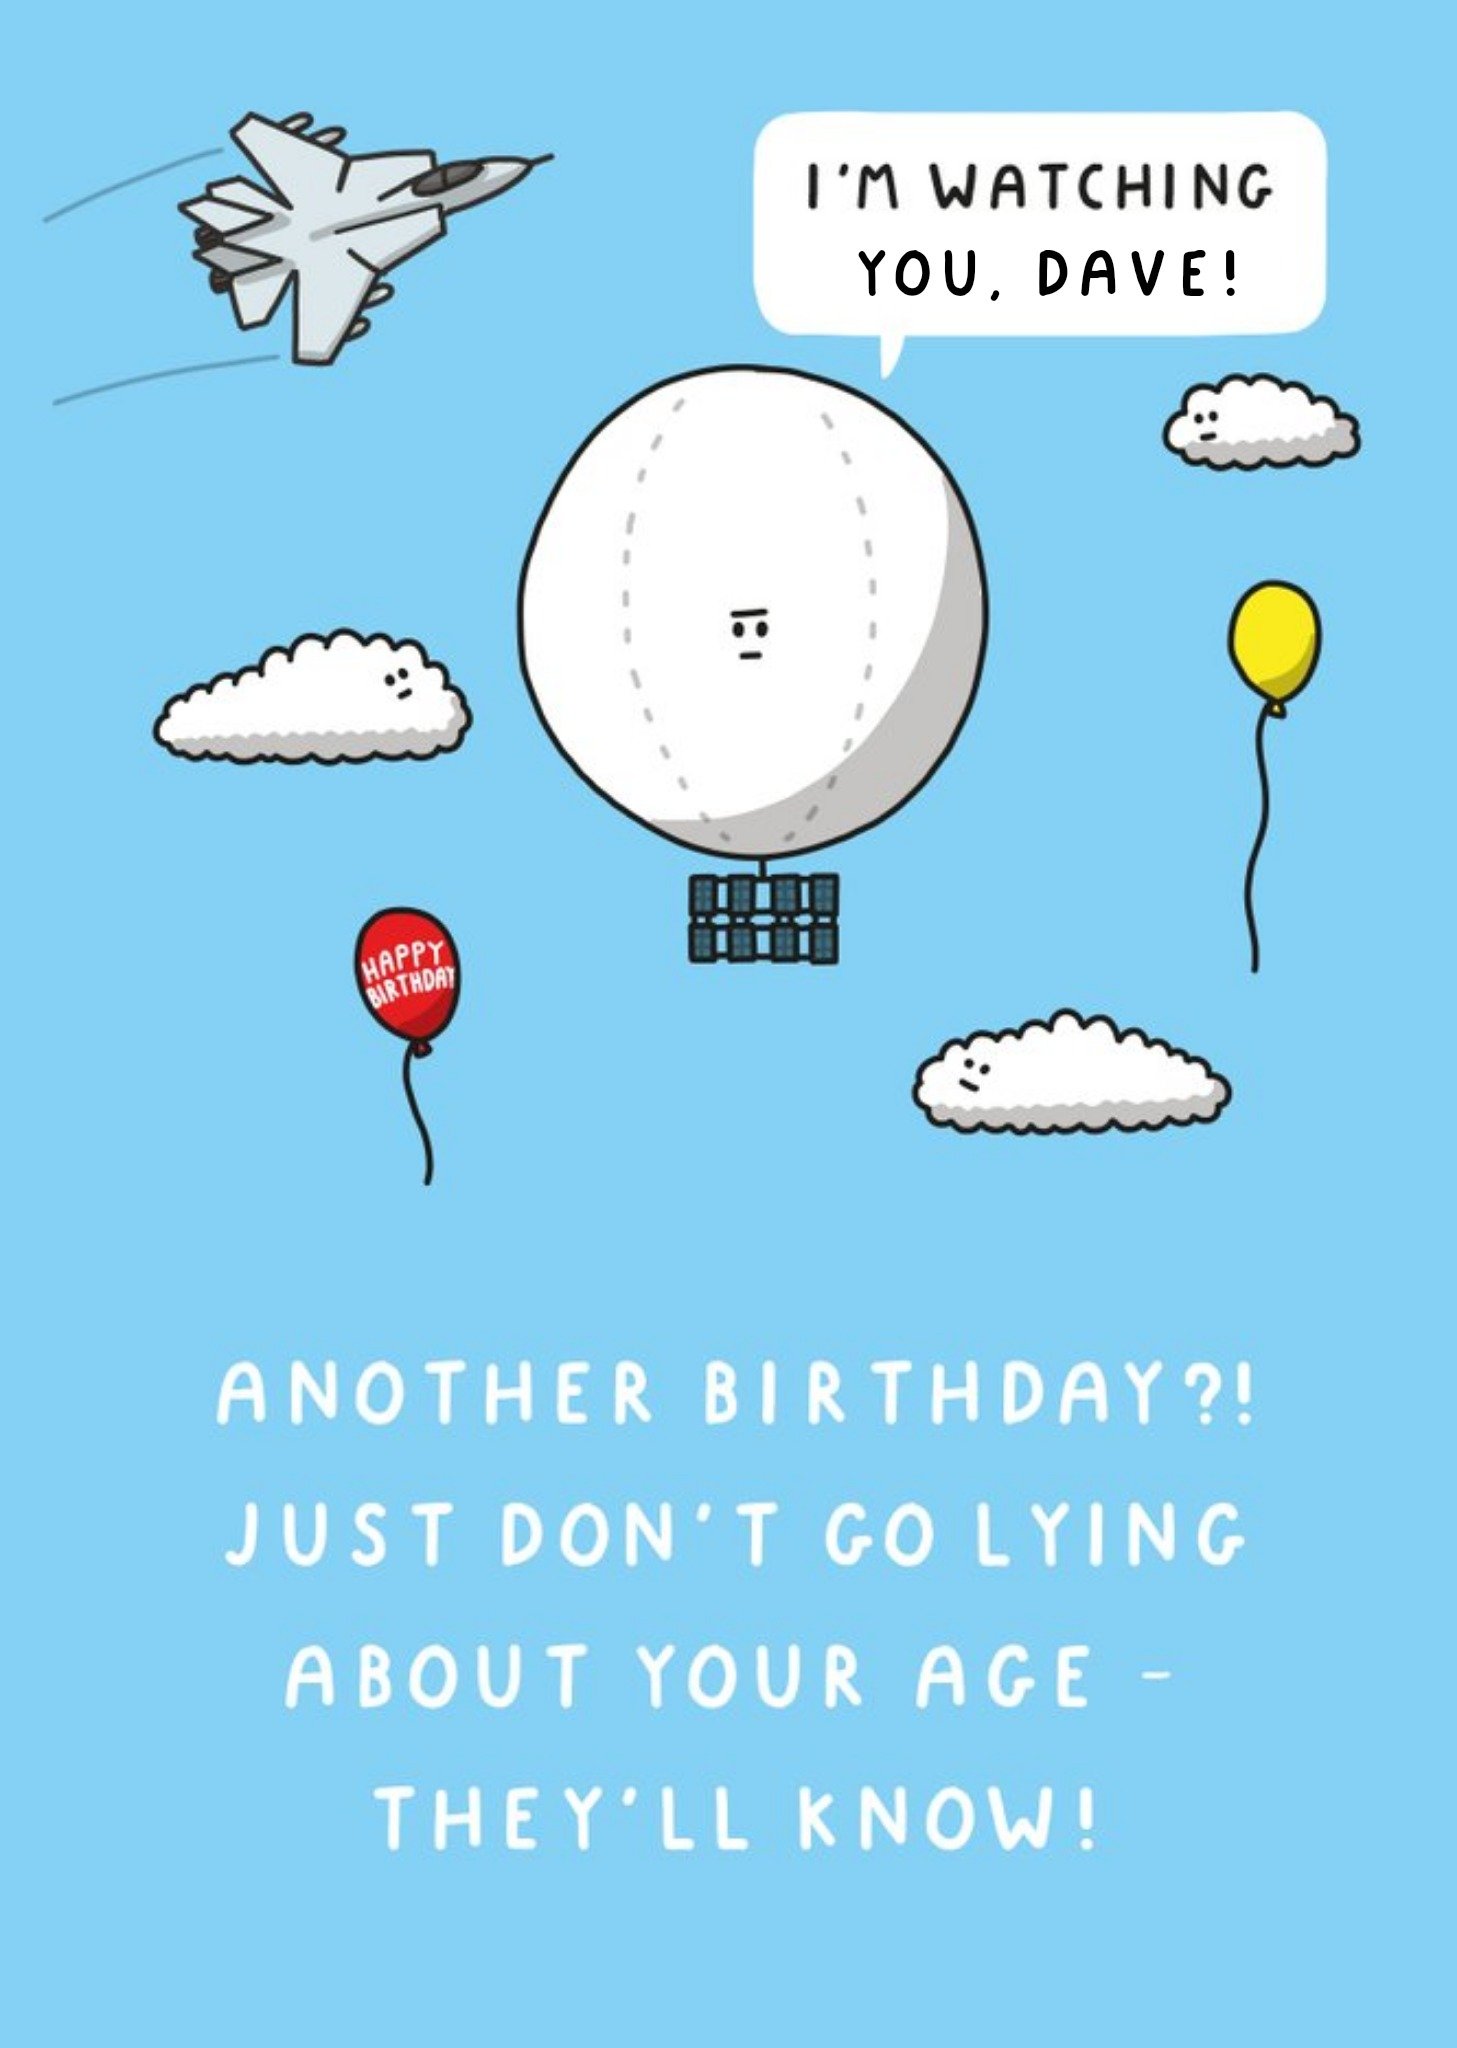 Moonpig Don't Go Lying About Your Age Funny Balloon Birthday Card Ecard